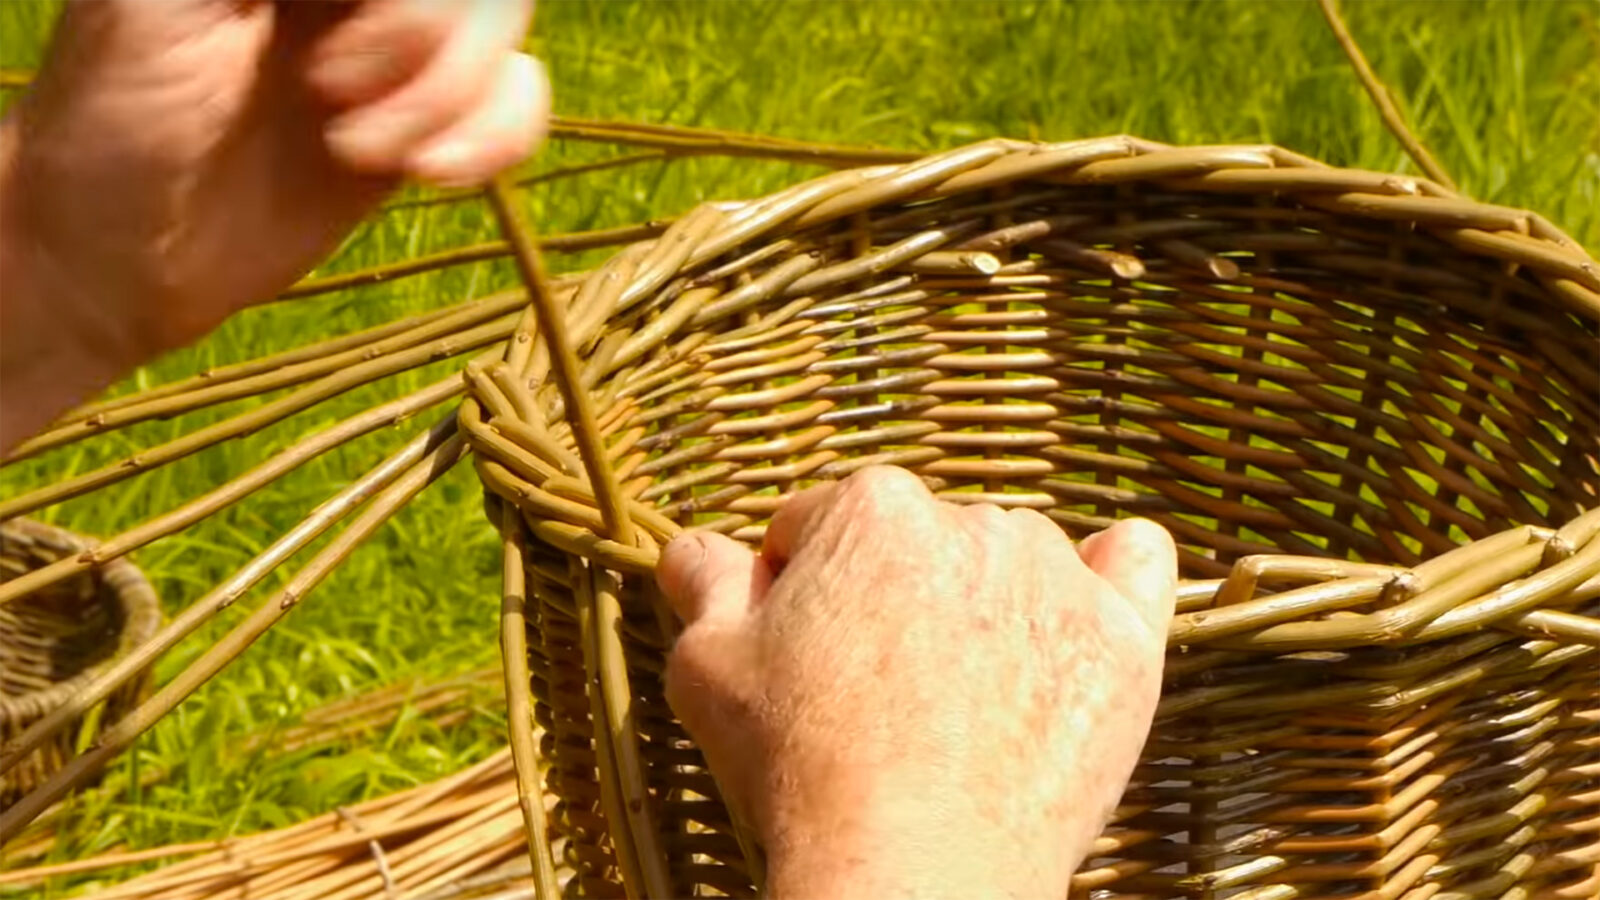 Making a traditional willow basket